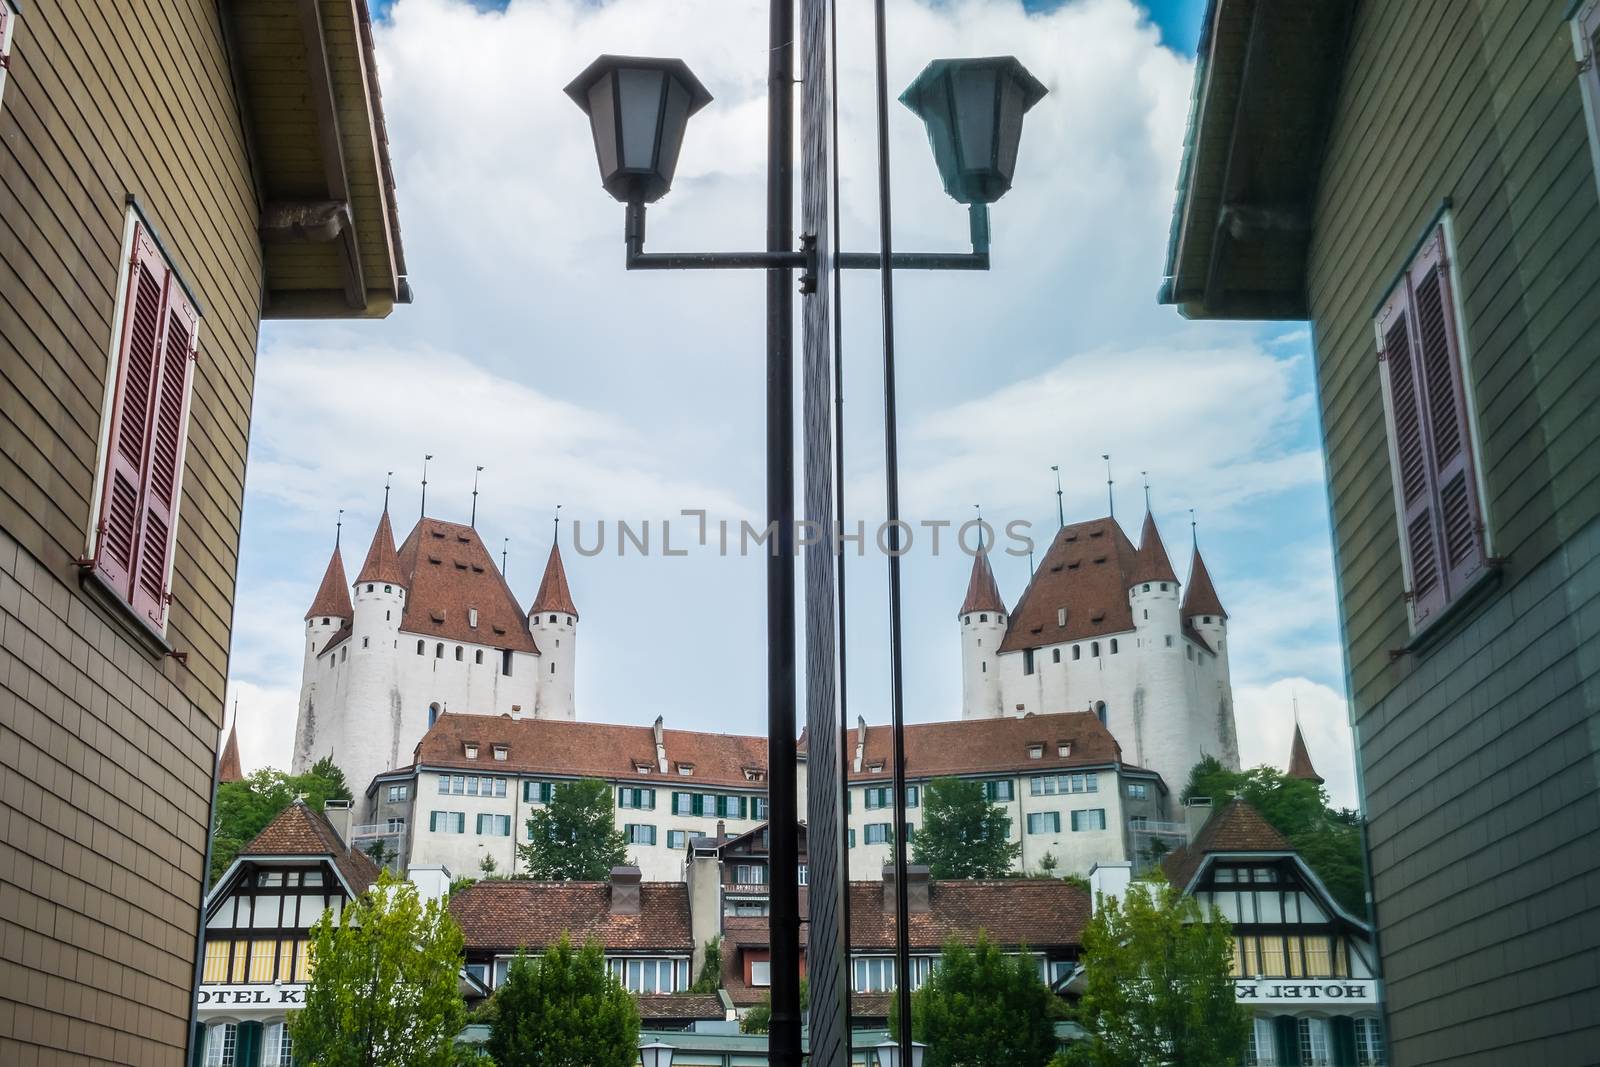 reflection of castle in Thun, Swiss